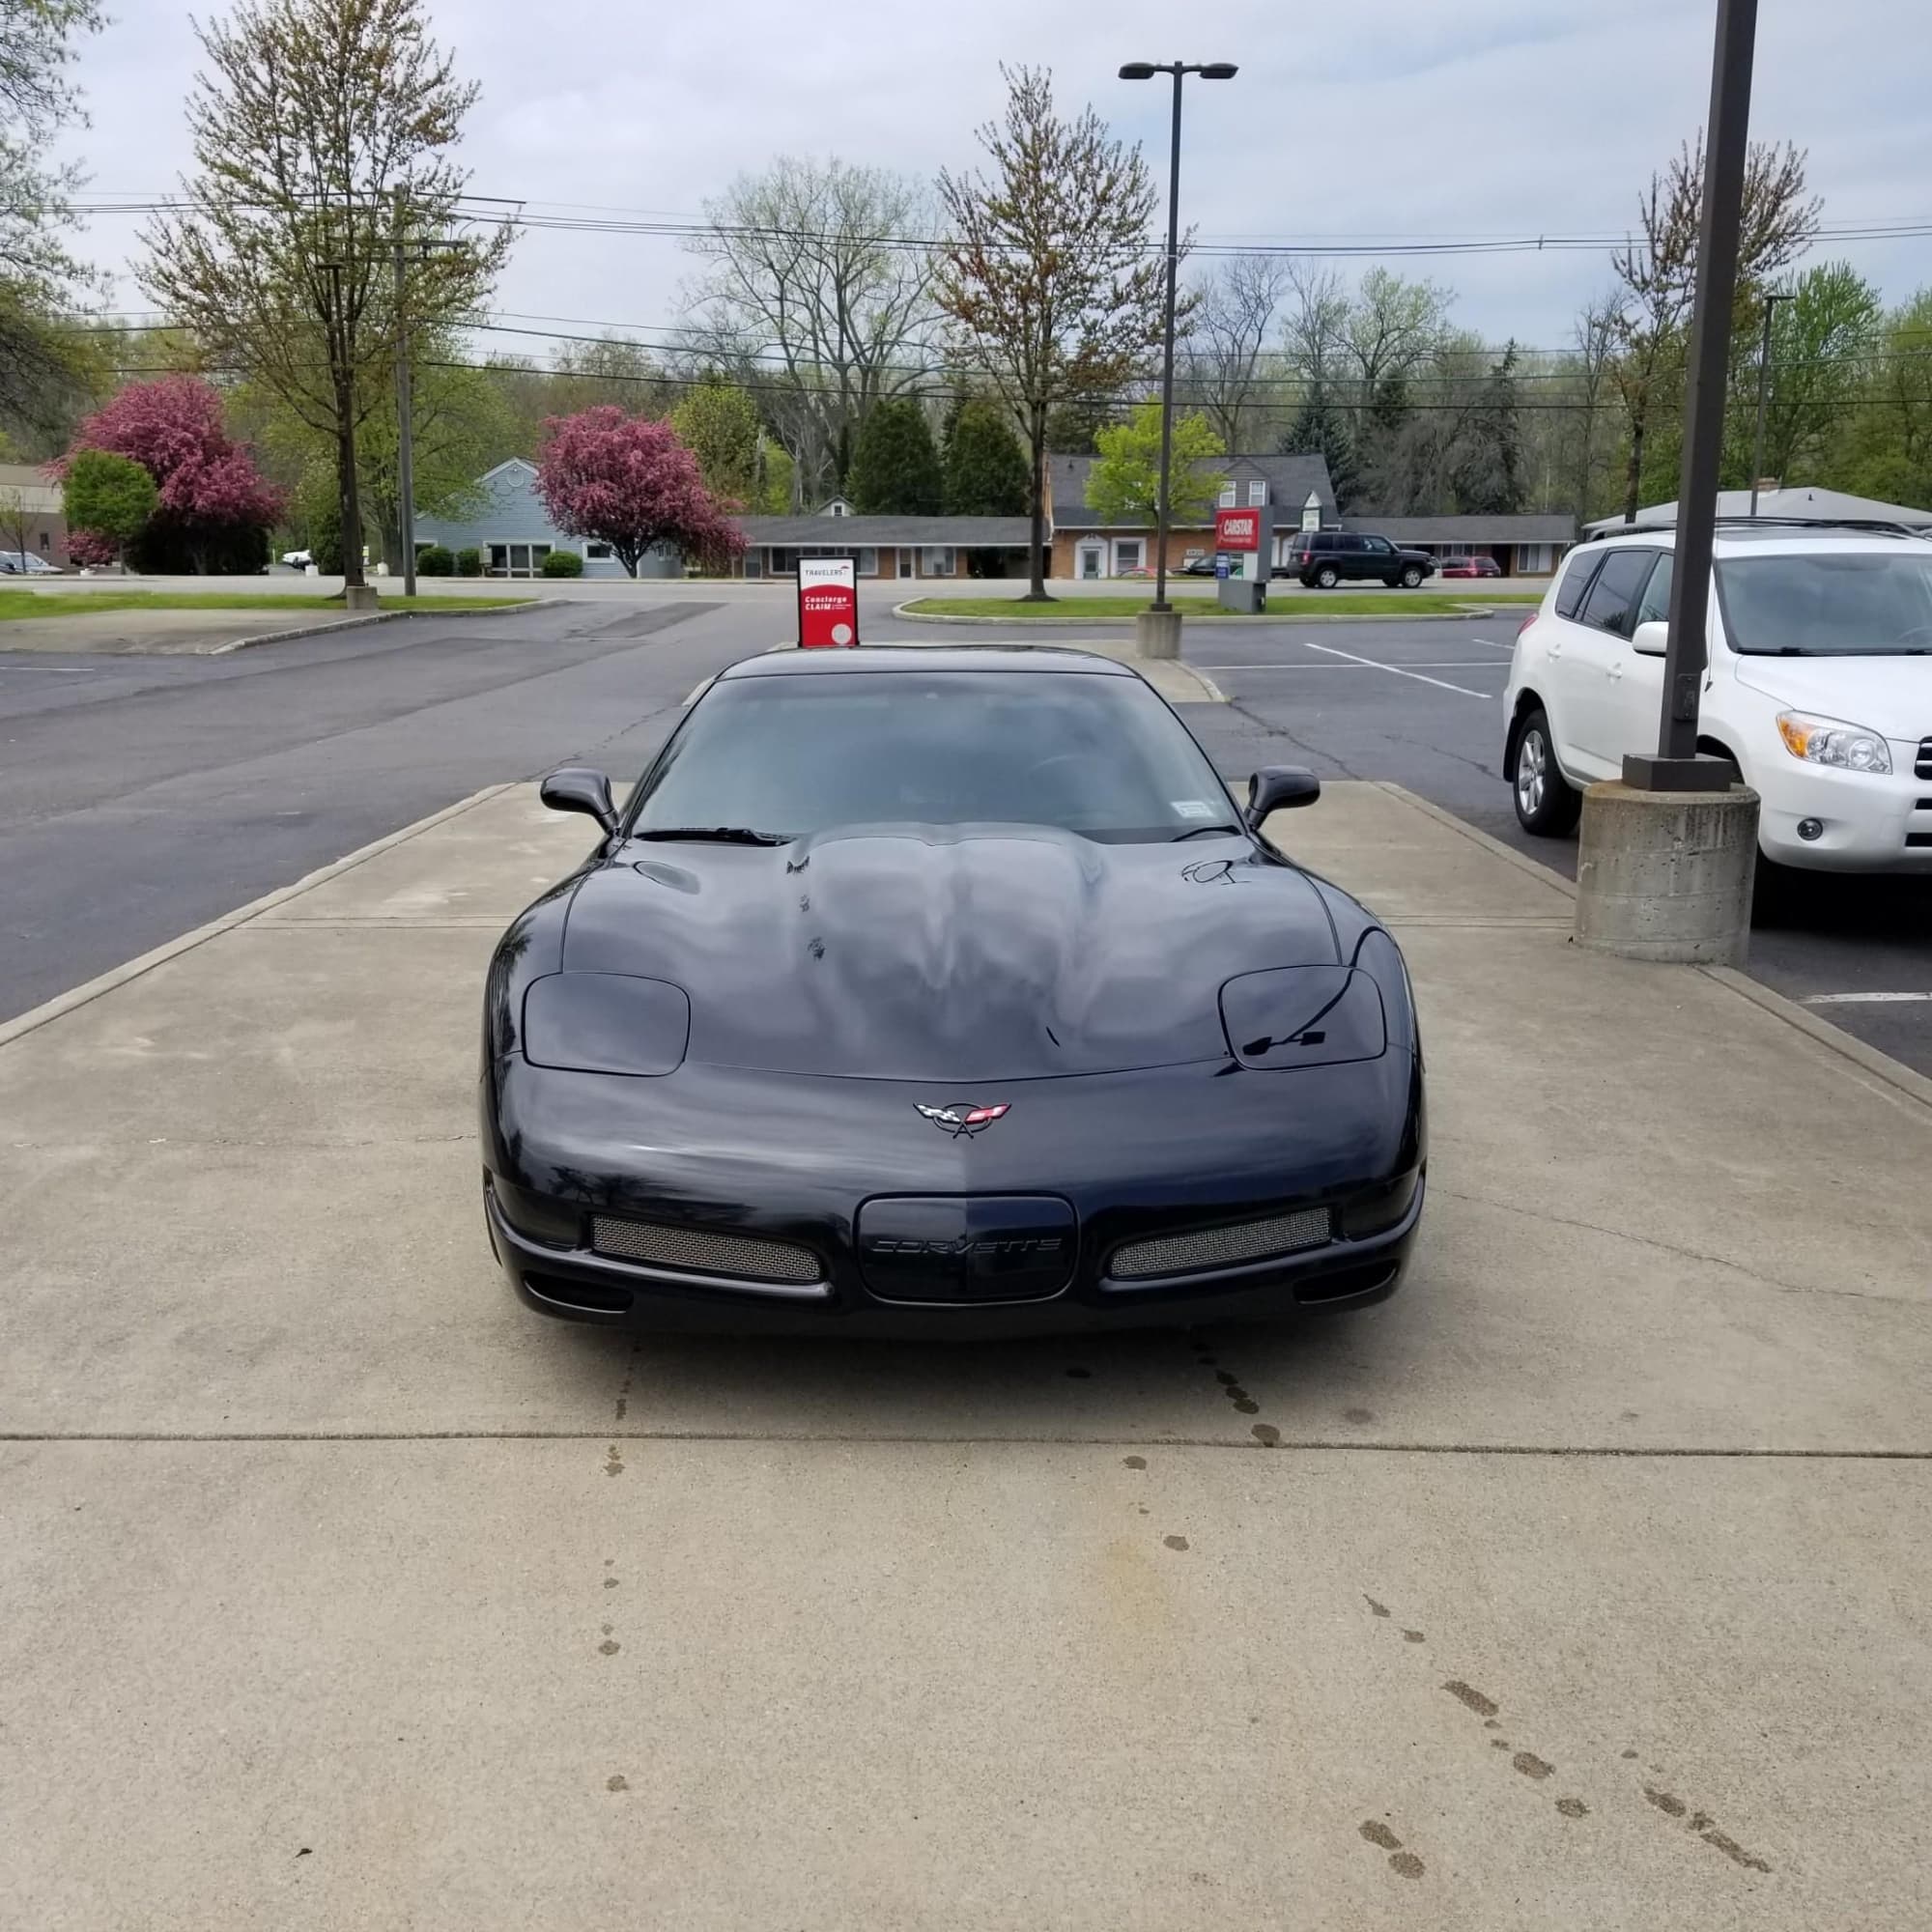 2000 Chevrolet Corvette - 2000 FRC Corvette sold! - Used - VIN ????????????????? - 8 cyl - 2WD - Manual - Coupe - Black - Amhertst, NY 14228, United States